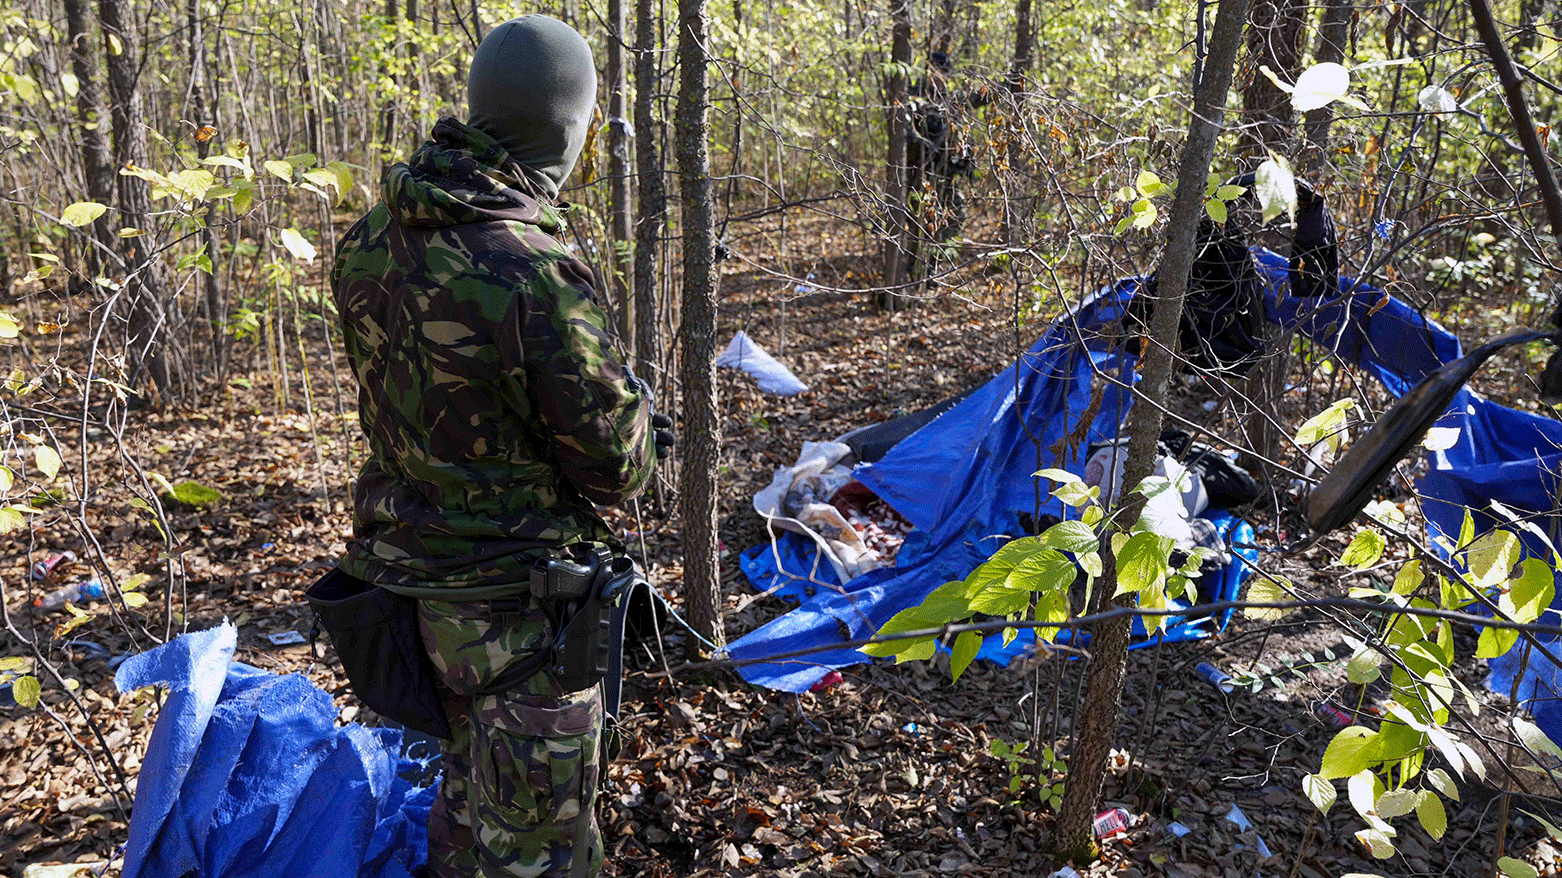 Serbian gendarmerie officers looking for migrants in a forest near the border between Serbia and Hungary, Serbia, Nov. 2, 2023. (Photo: AP)